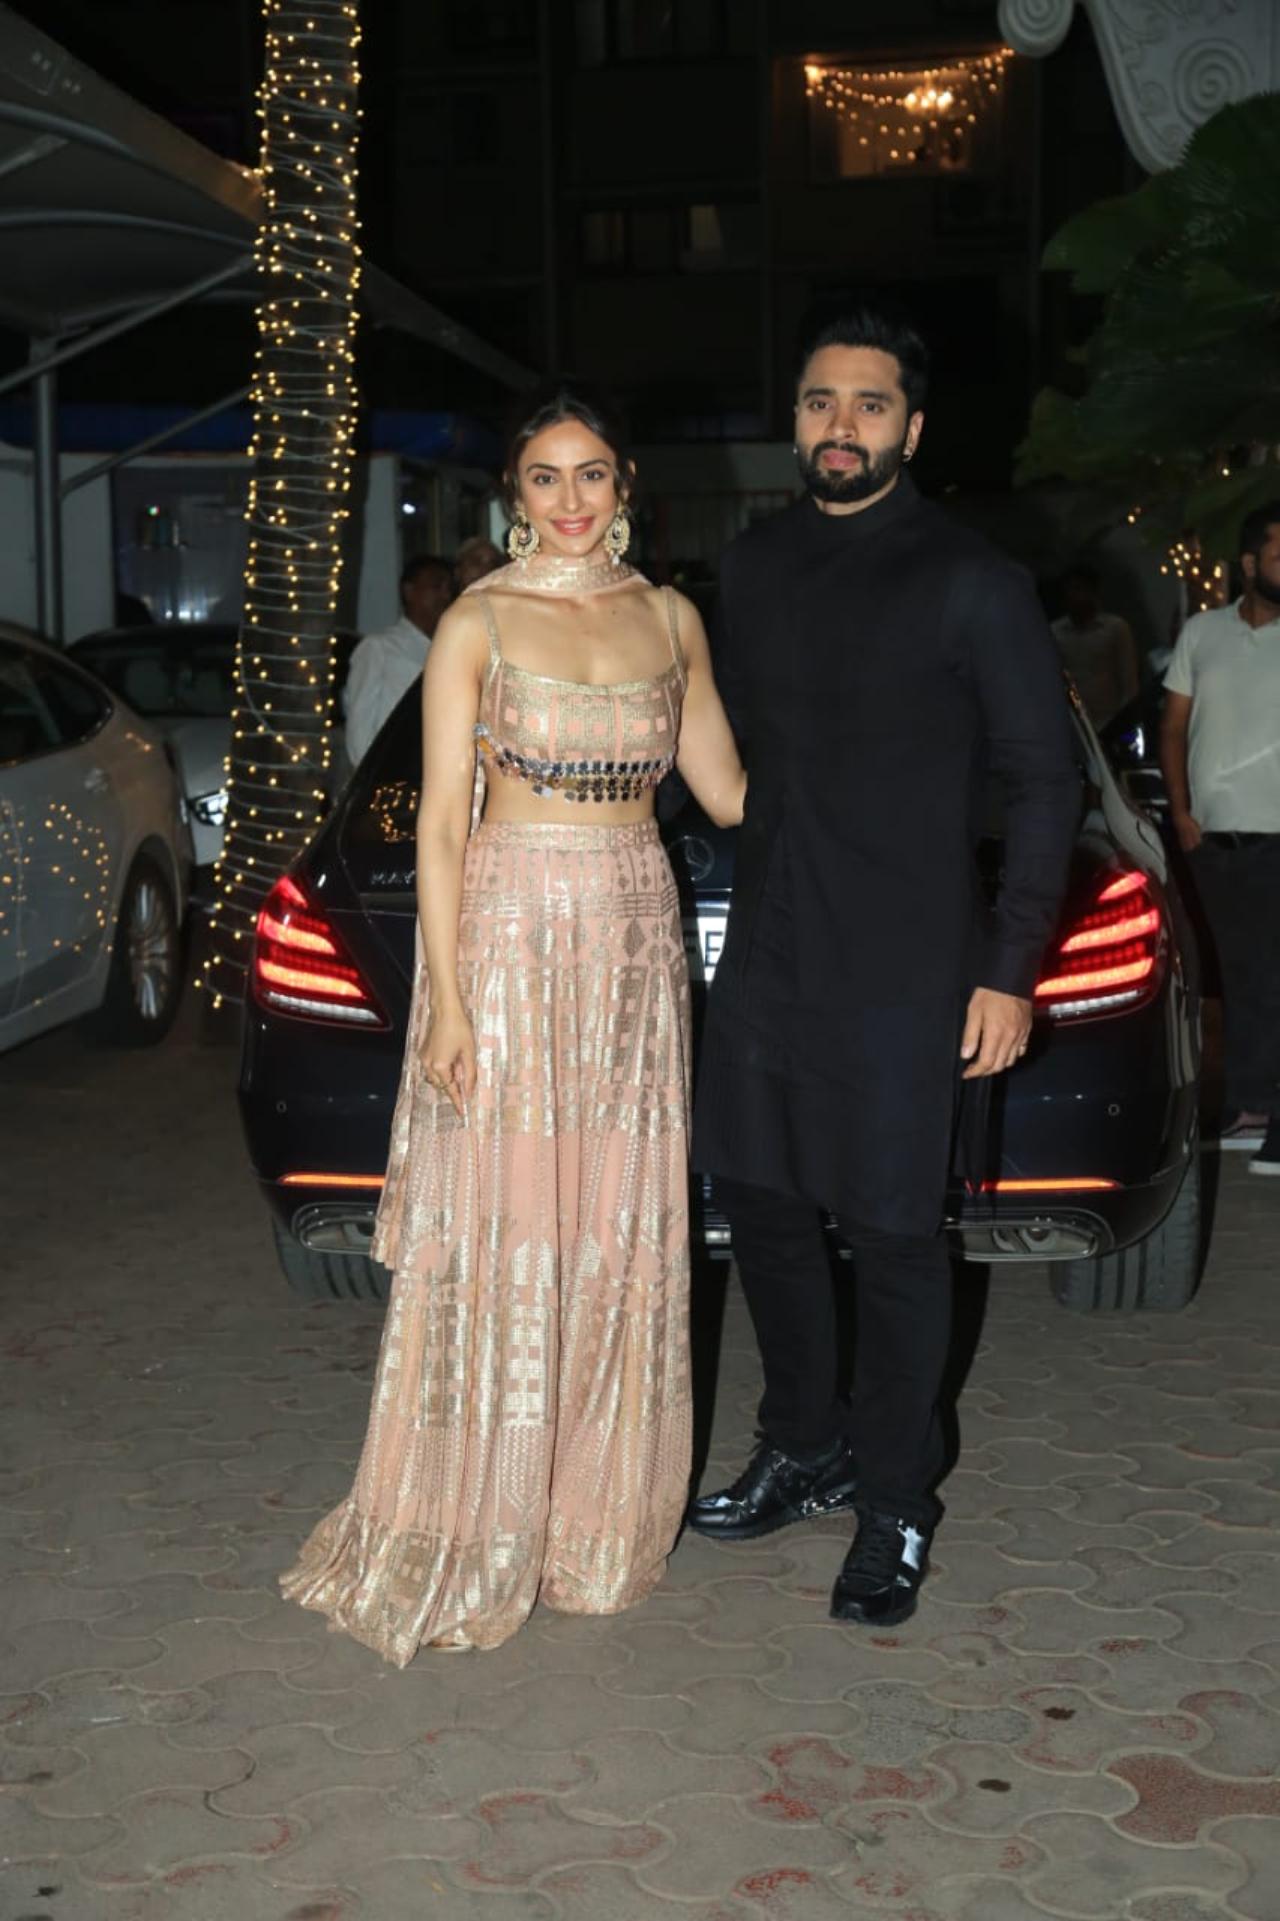 Rakul Preet Singh and Jackky Bhagnani arrived together in complimenting colours. With buzz about their impending the marriage, the couple were seen together at almost all the parties in the past week